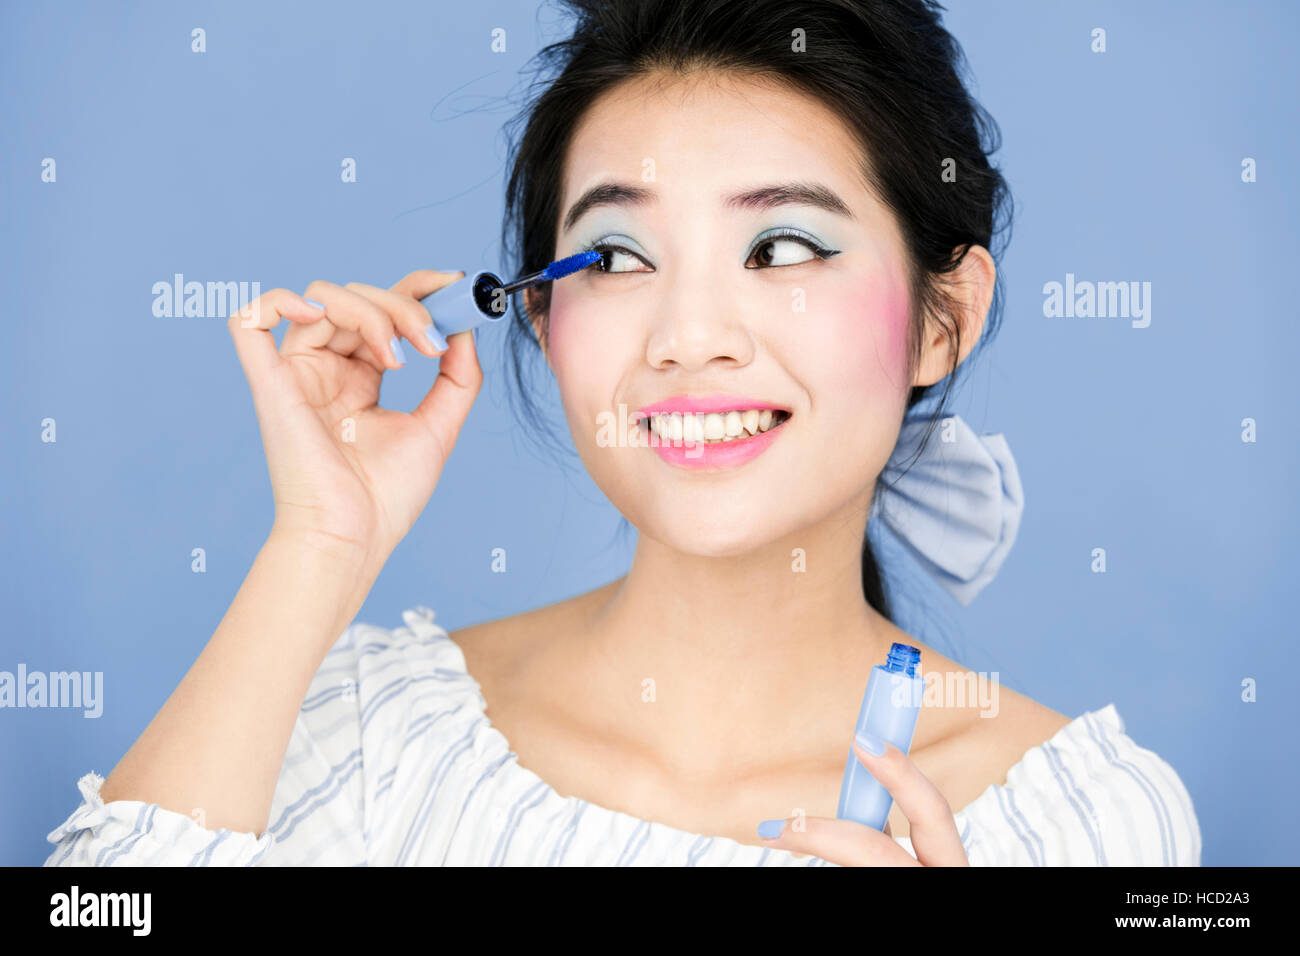 Portrait of young smiling woman using makeup tool Stock Photo